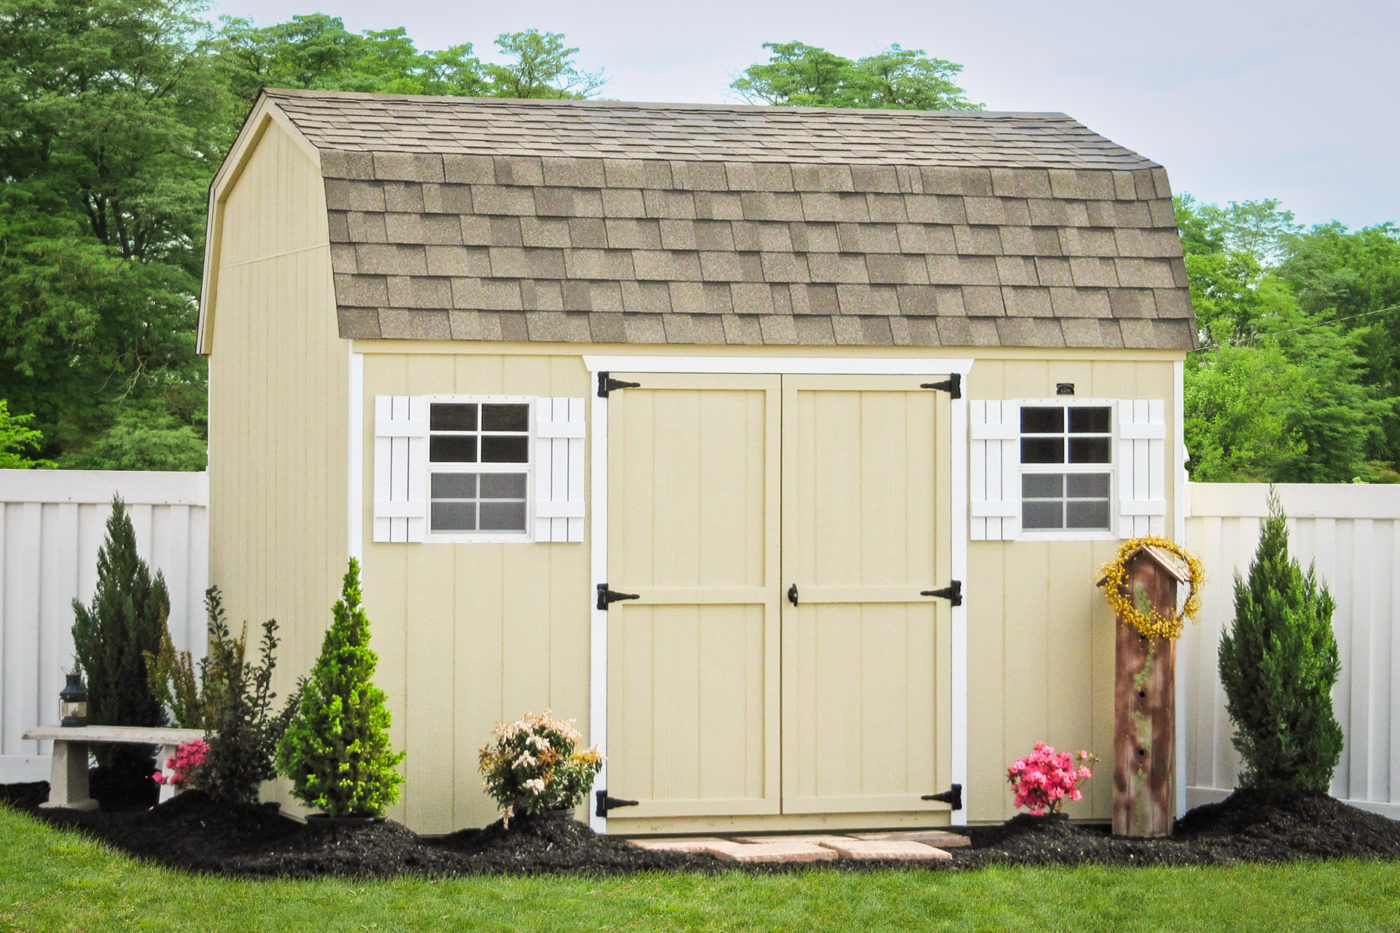 A shed barn kit with wood siding